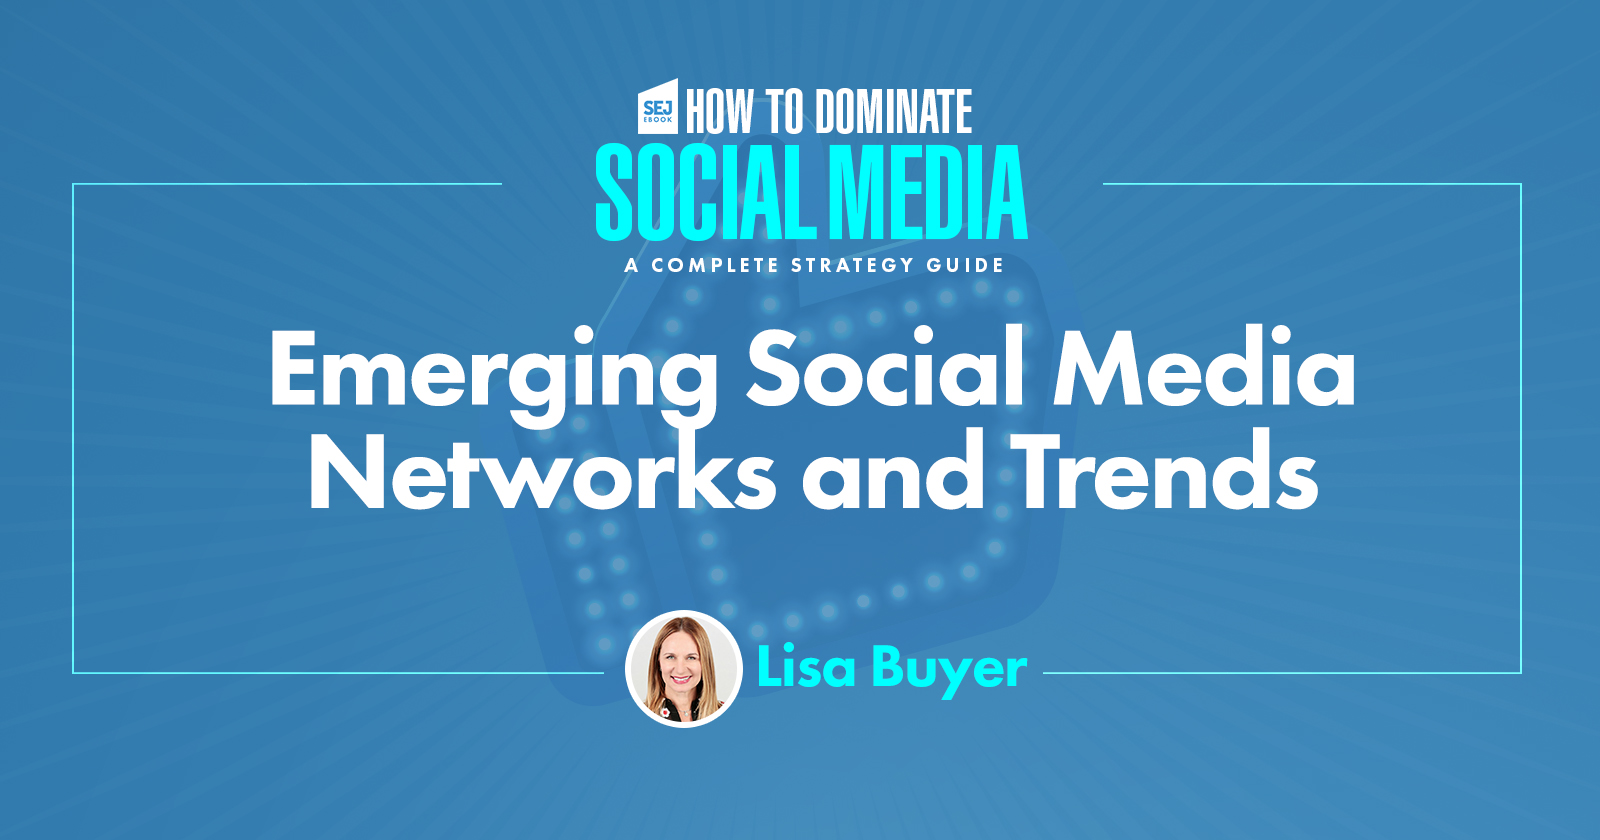 Emerging Social Media Networks and Trends